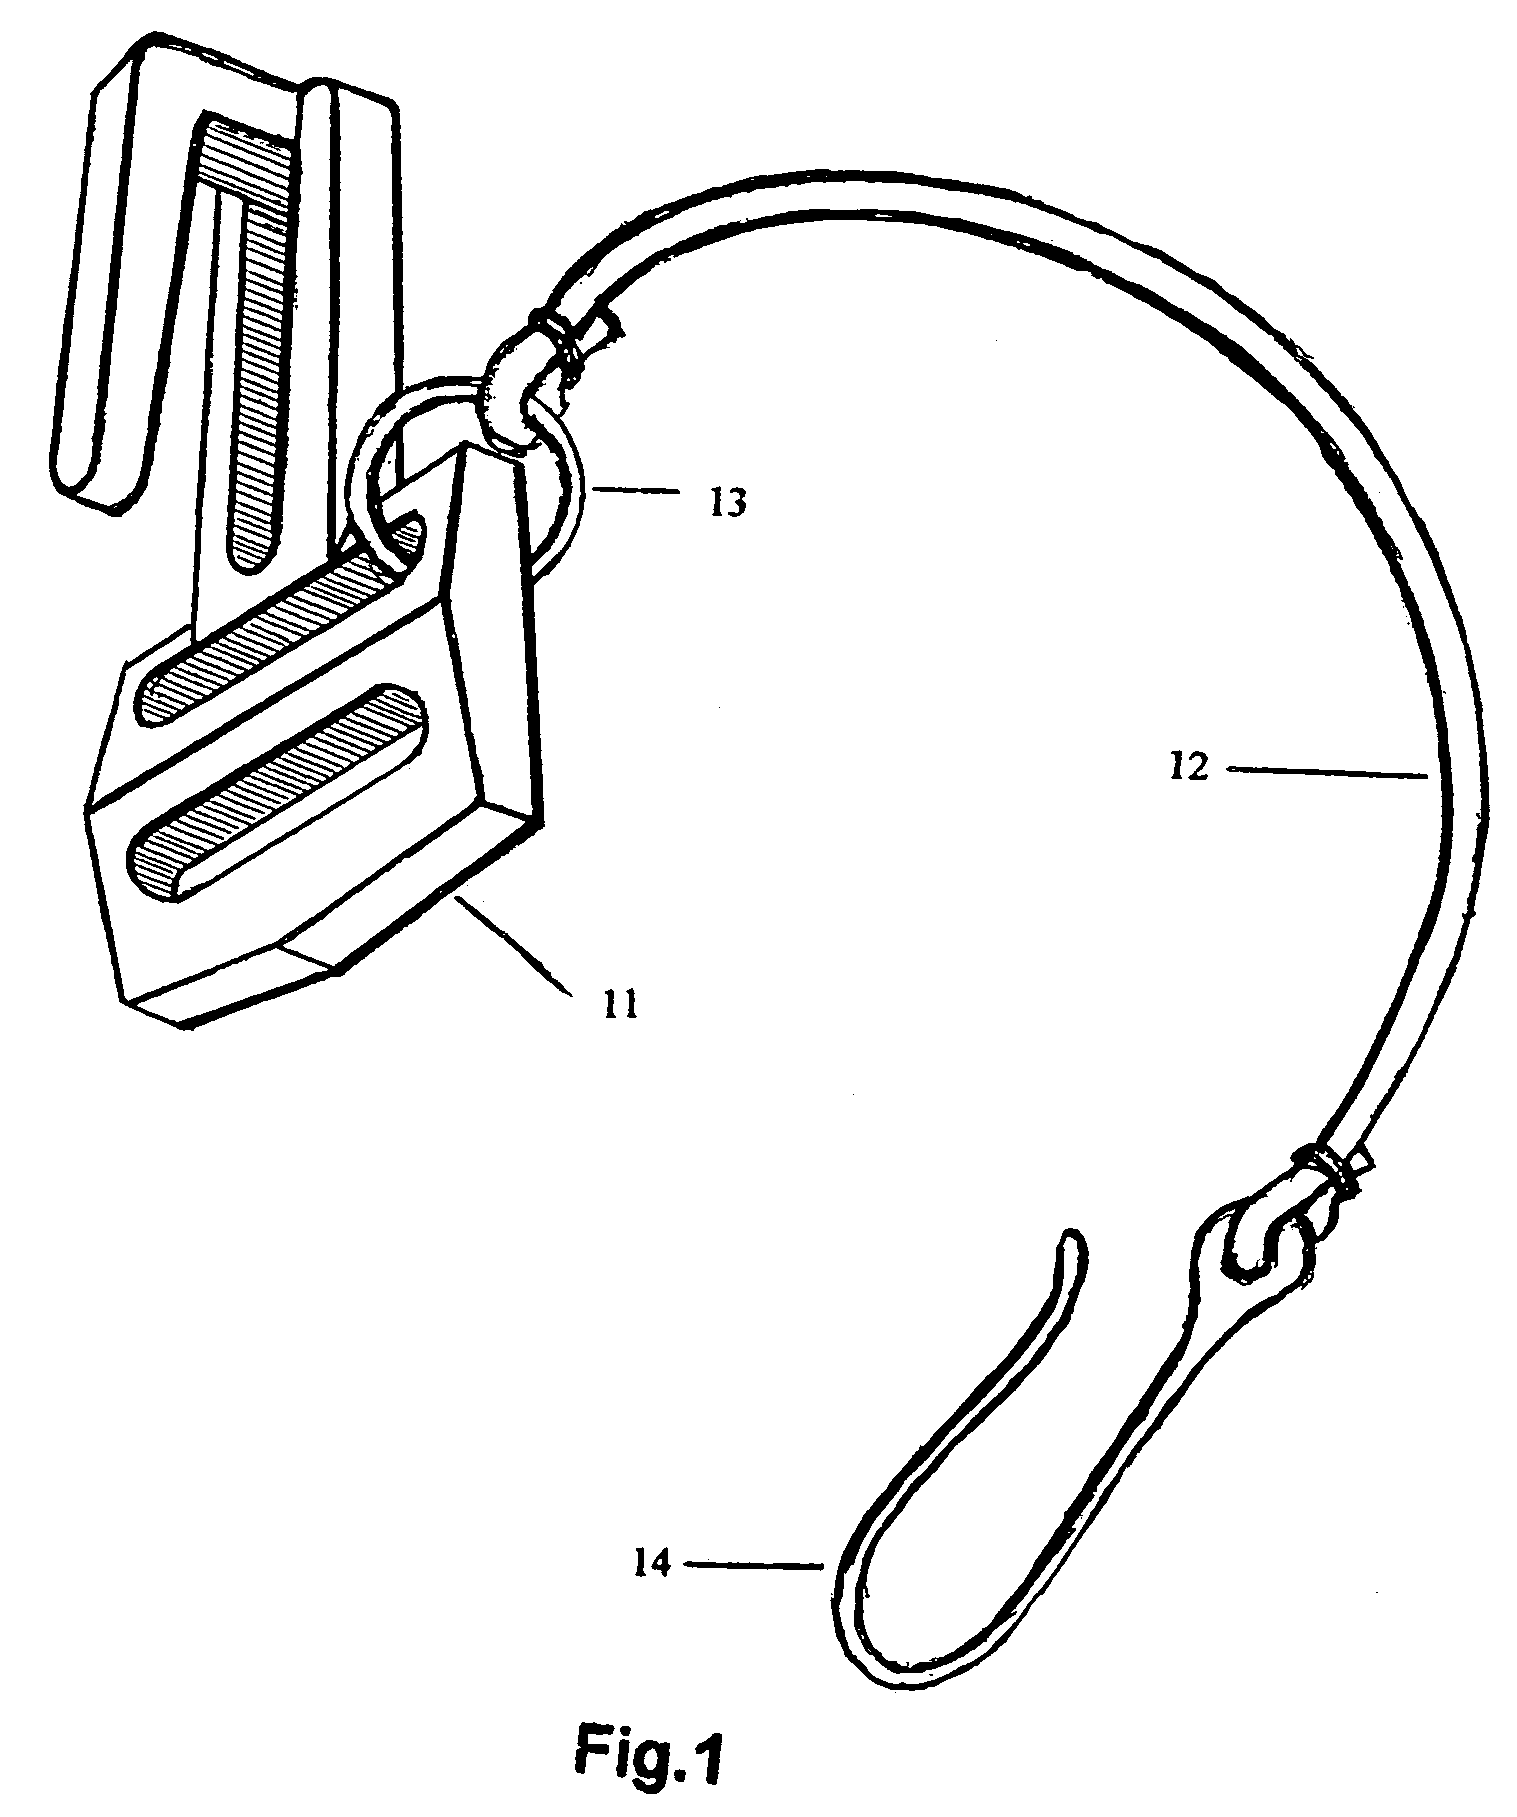 Sling clip for carrying a rifle